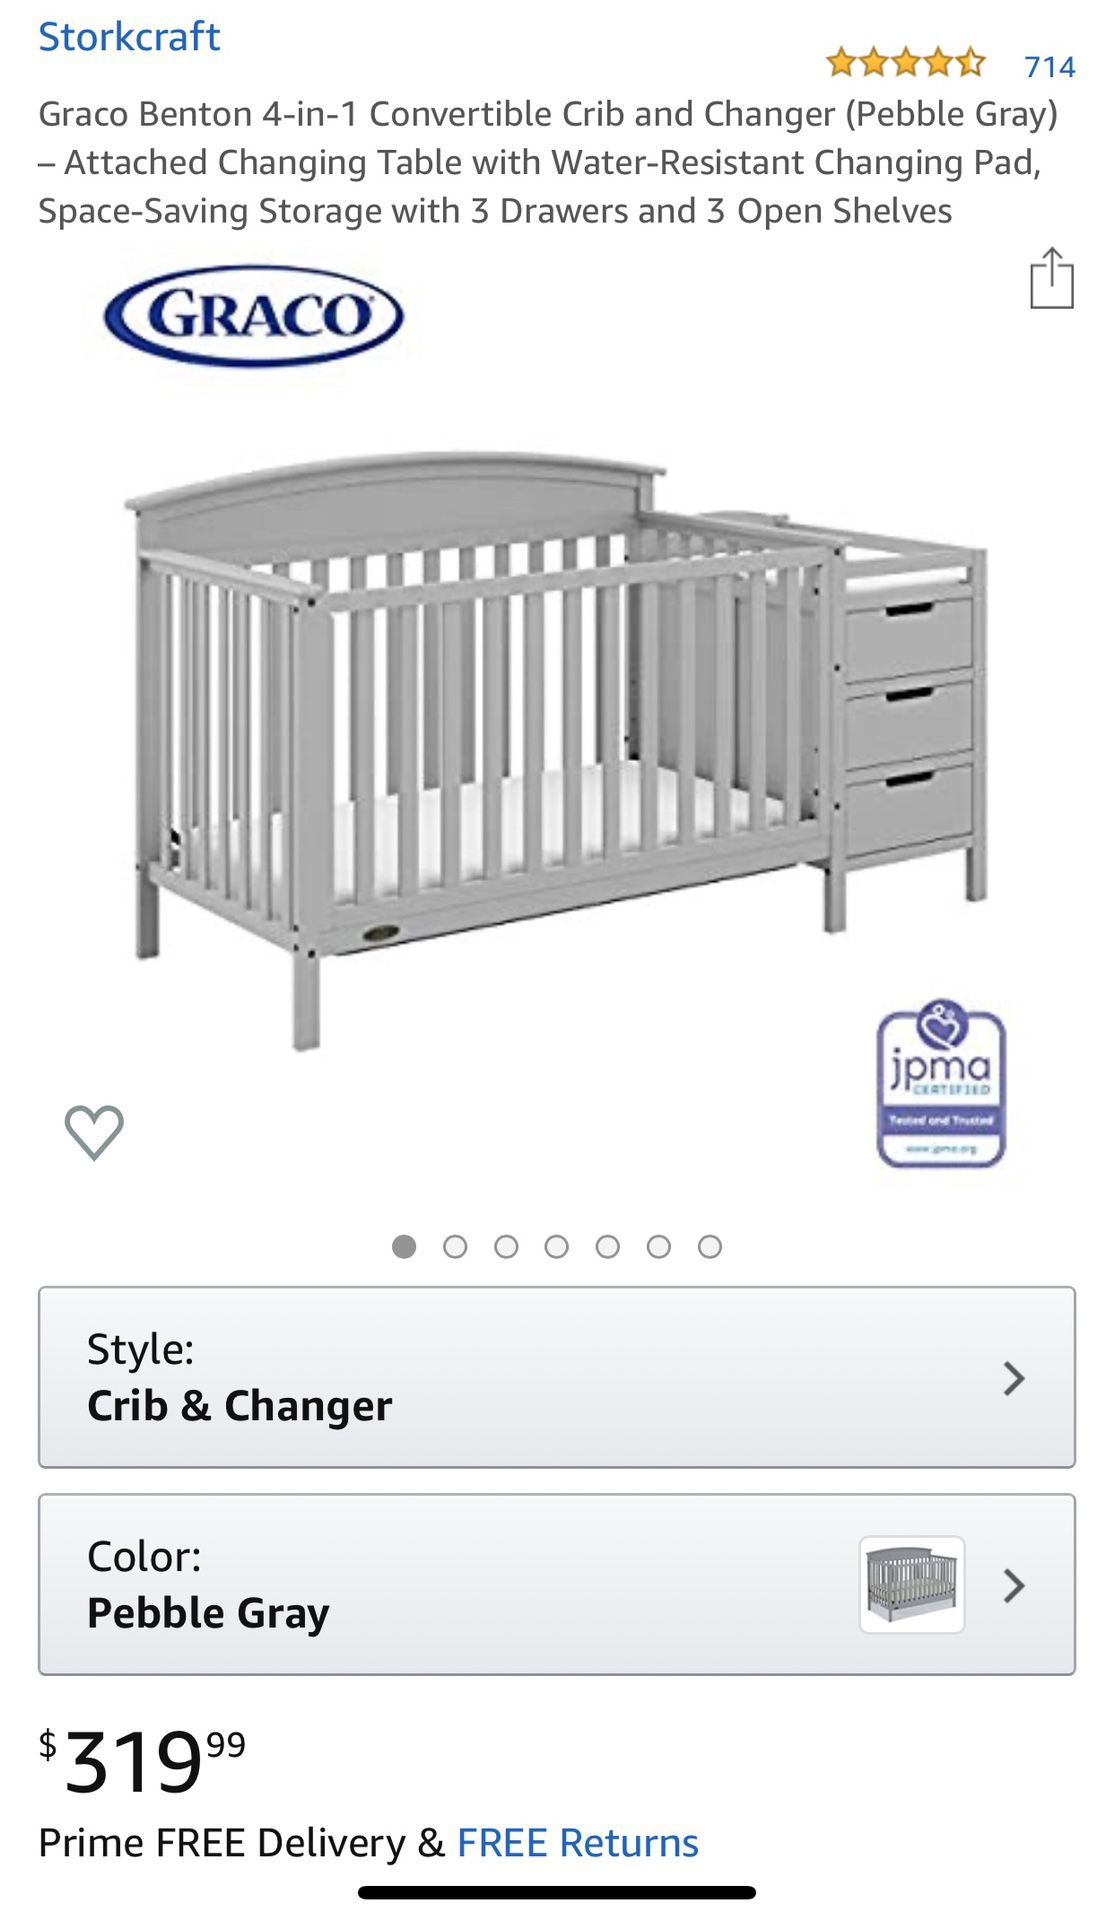 Graco Benton 4 in 1 crib with changer